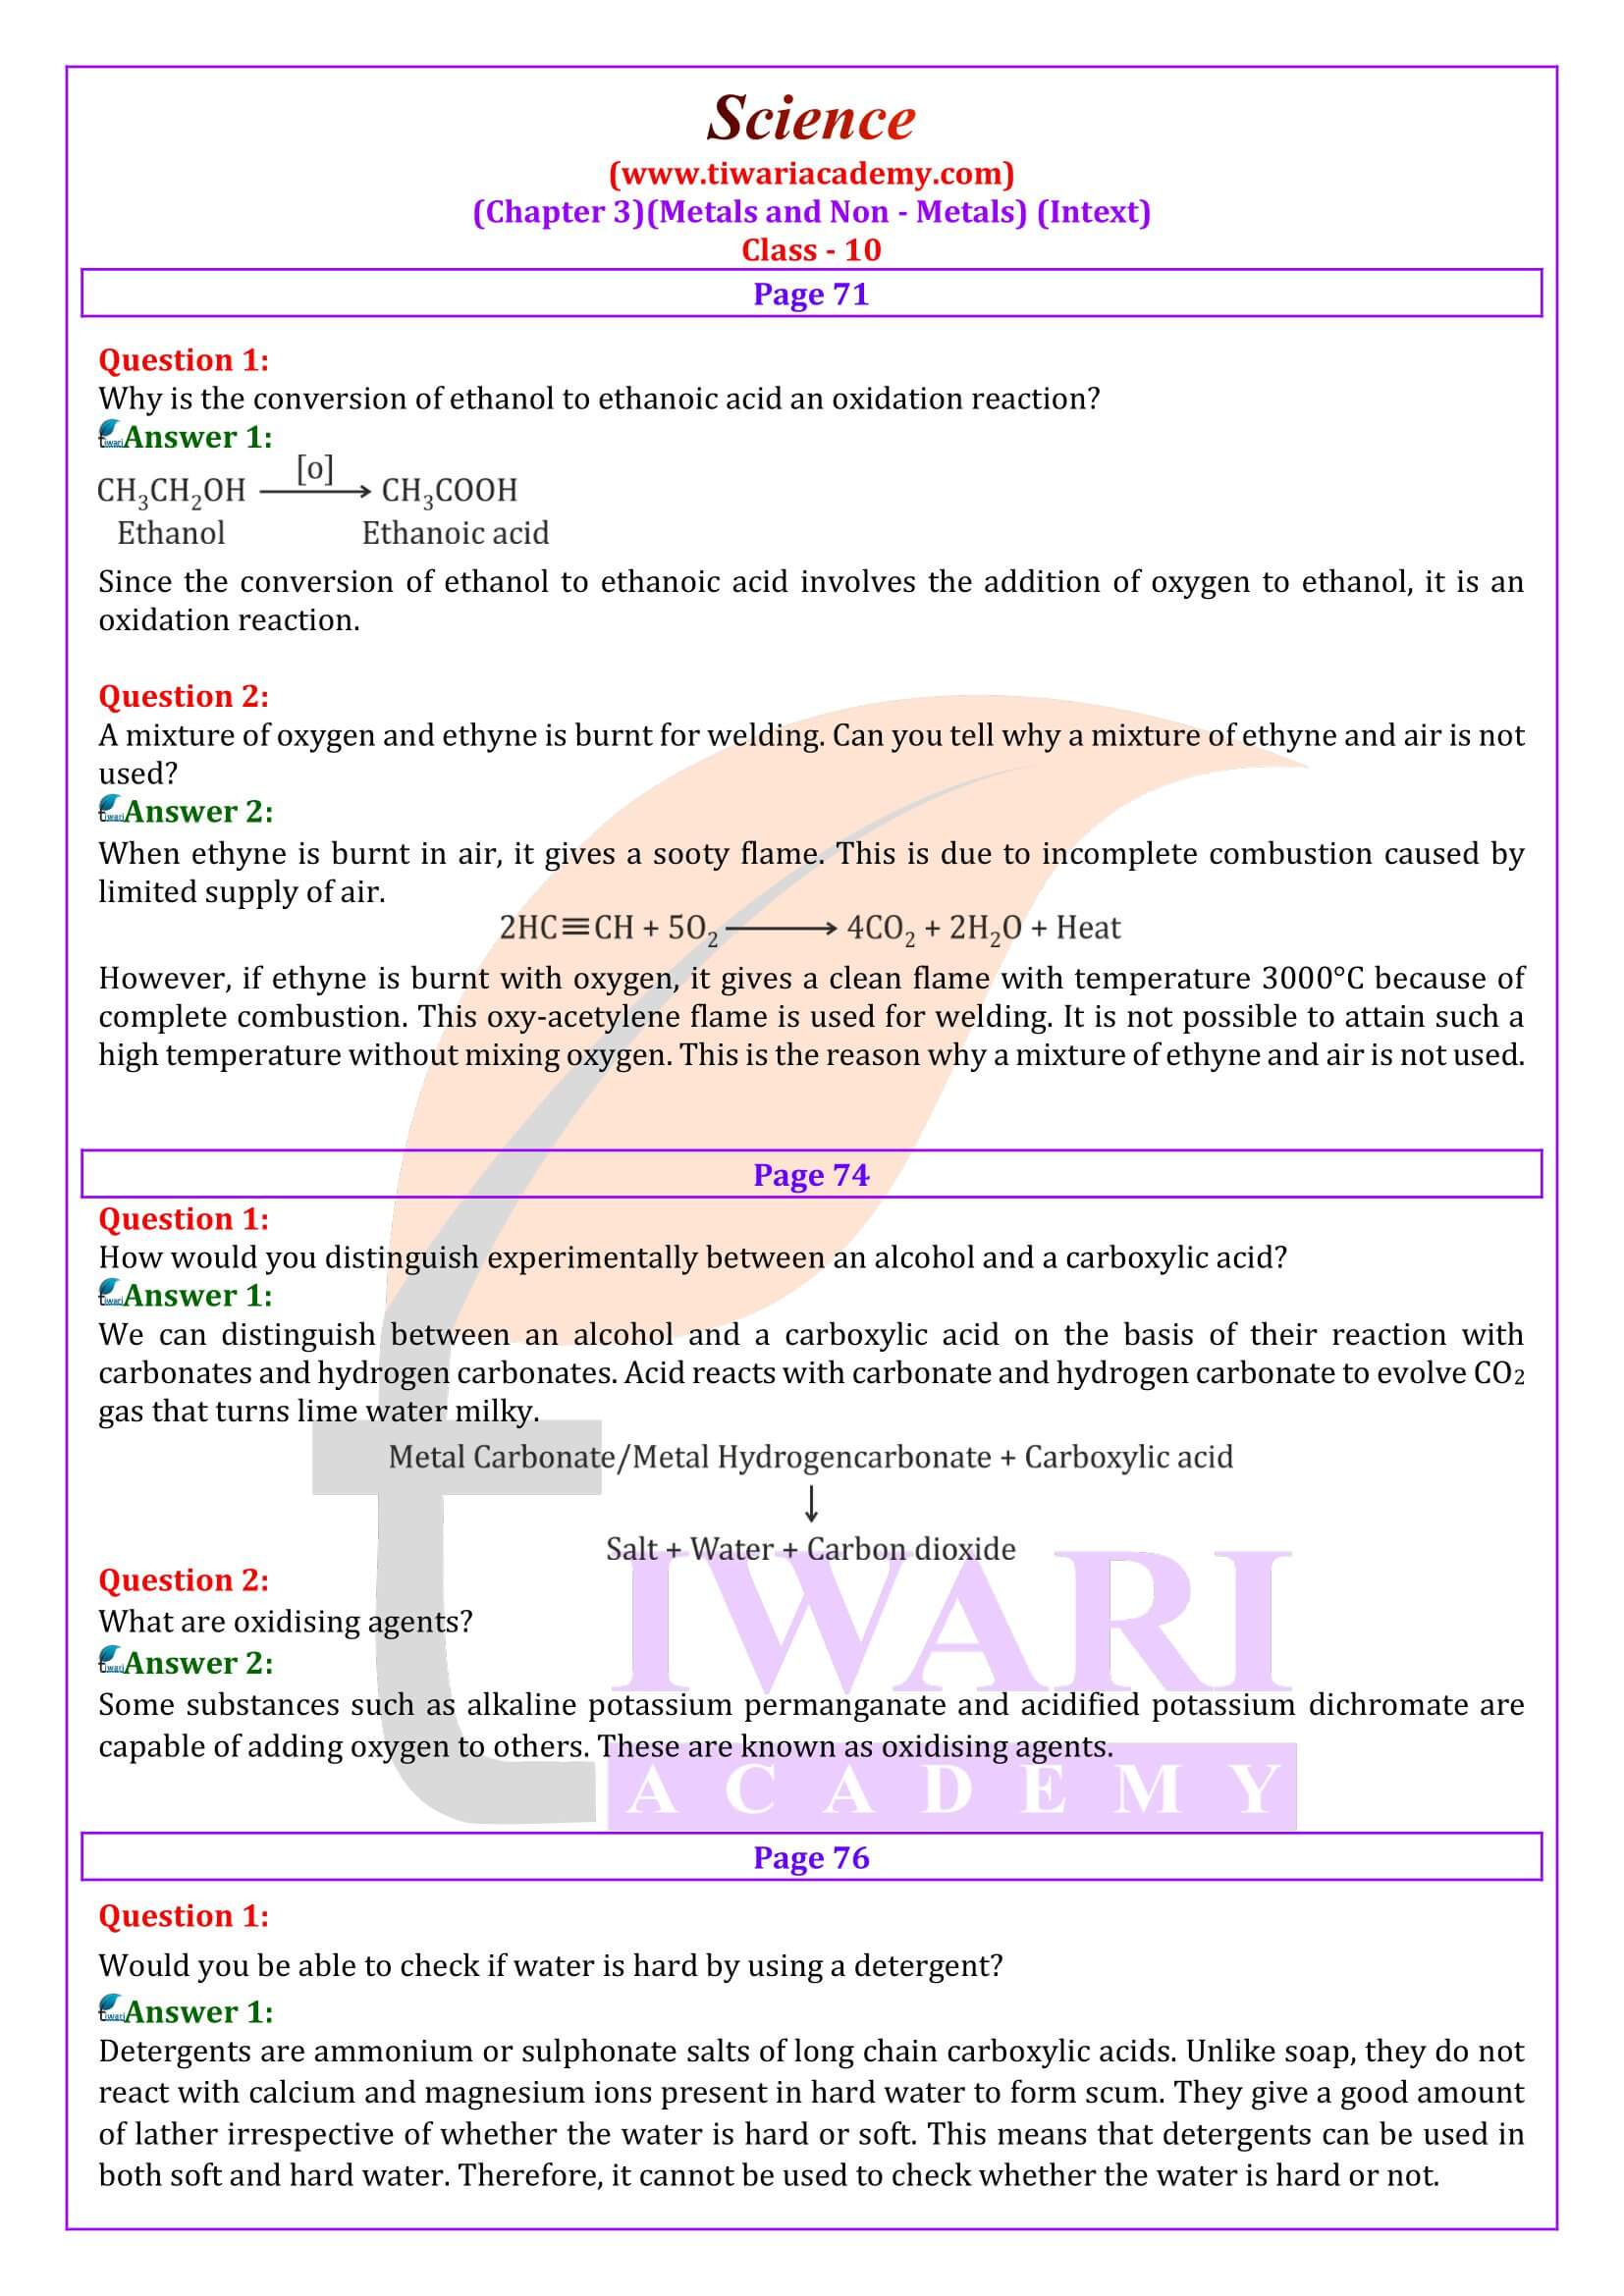 NCERT Solutions for Class 10 Science Chapter 4 guide